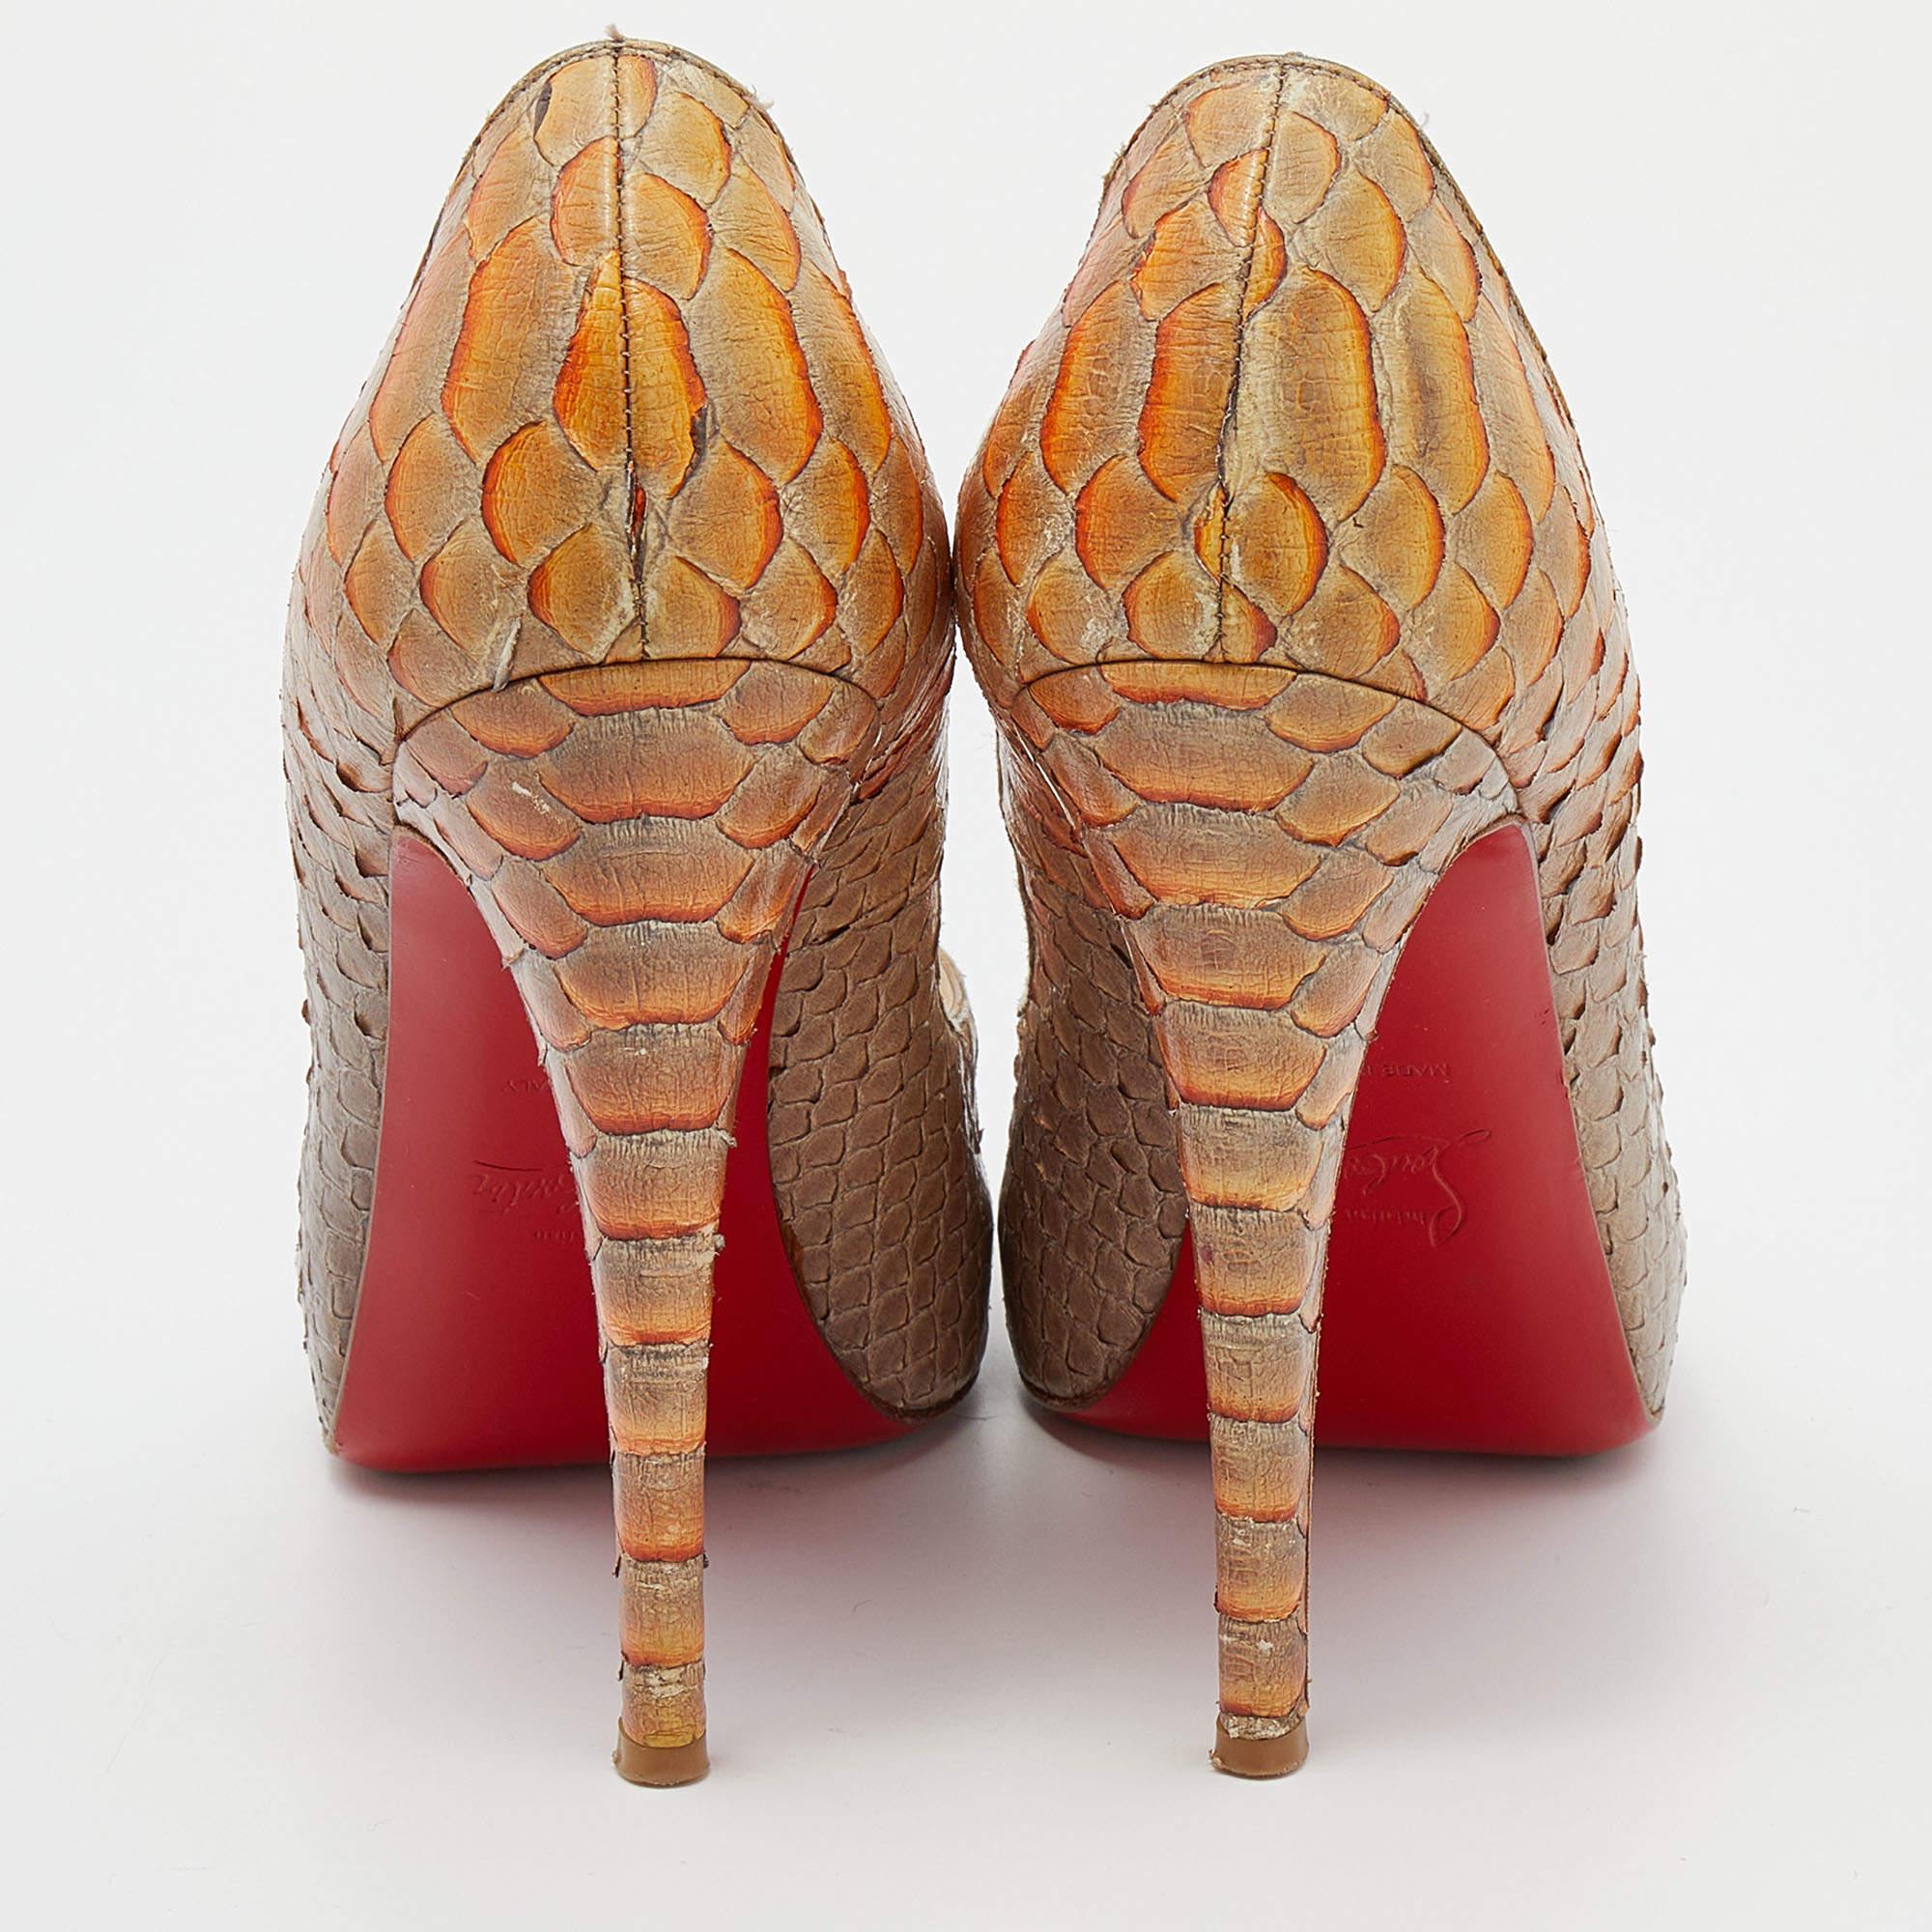 The alluring Altadama design and a versatile beige hue of these Christian Louboutin pumps make the pair a must-have. Crafted skilfully, these pumps are set on a durable base and comfortable heel. Choose this finely-designed pair of pumps to make a